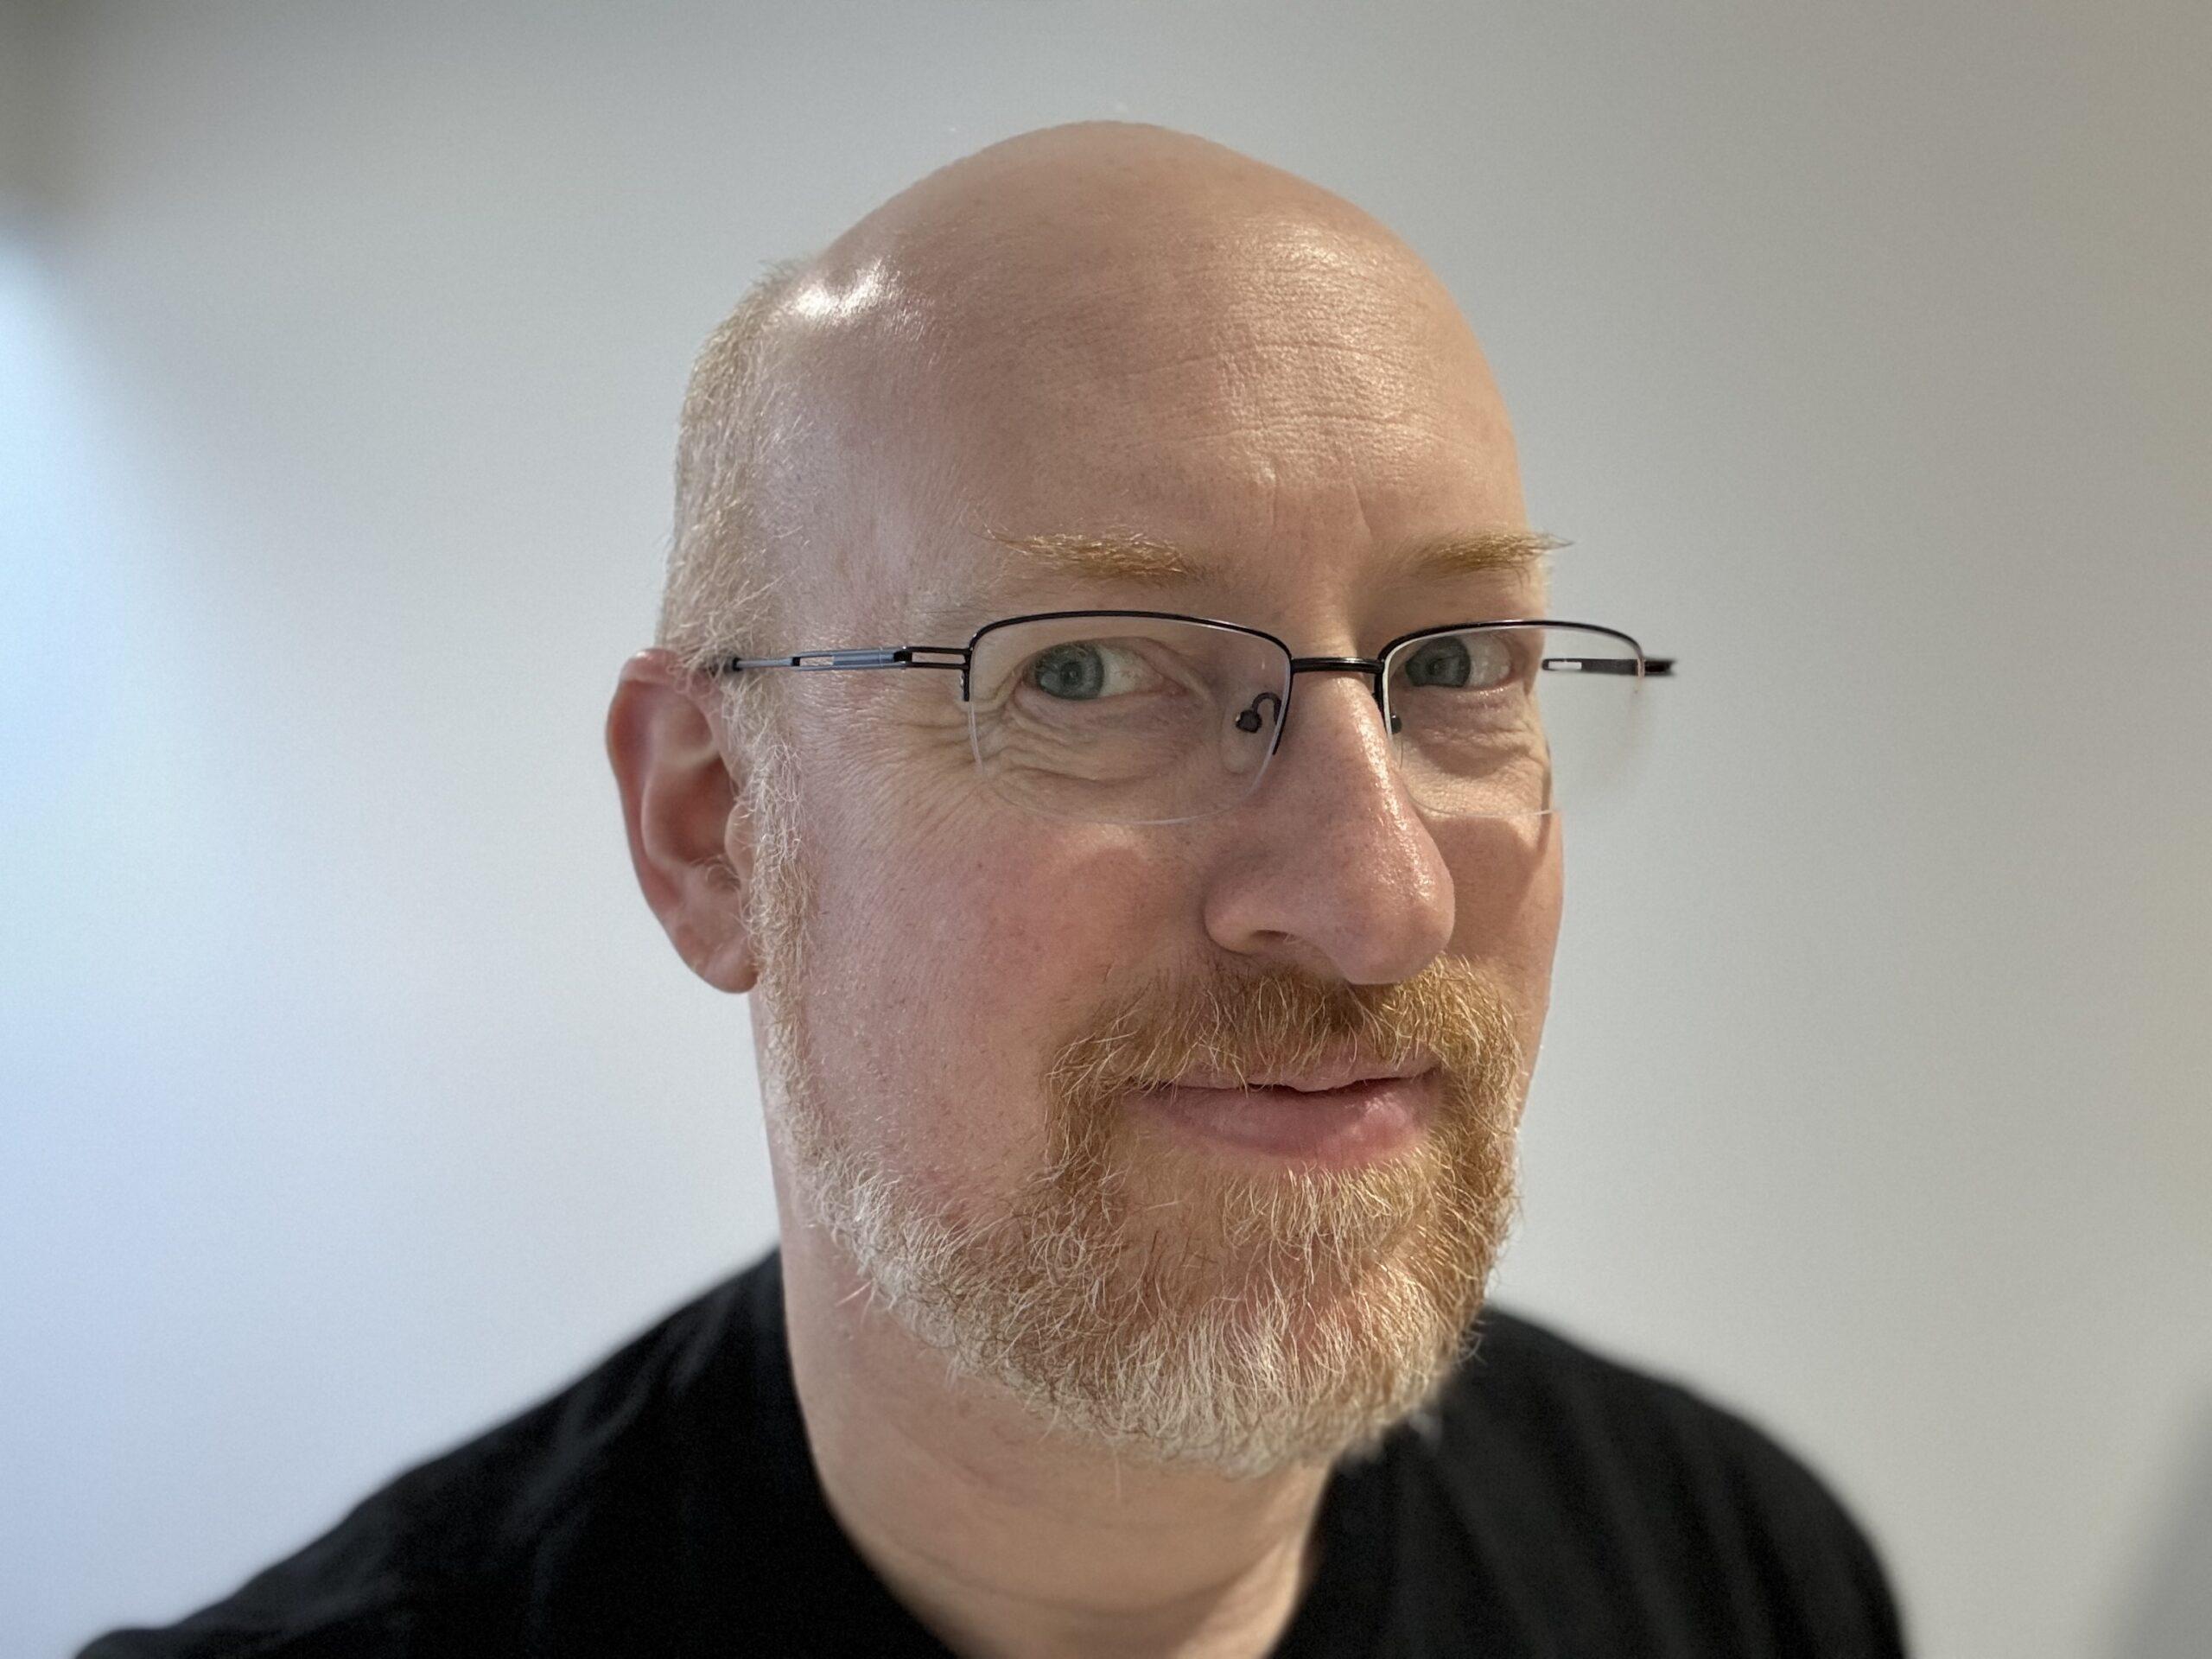 Me, a white man, bald, with greying red beard, wearing glasses and a black t-shirt, against a white background.